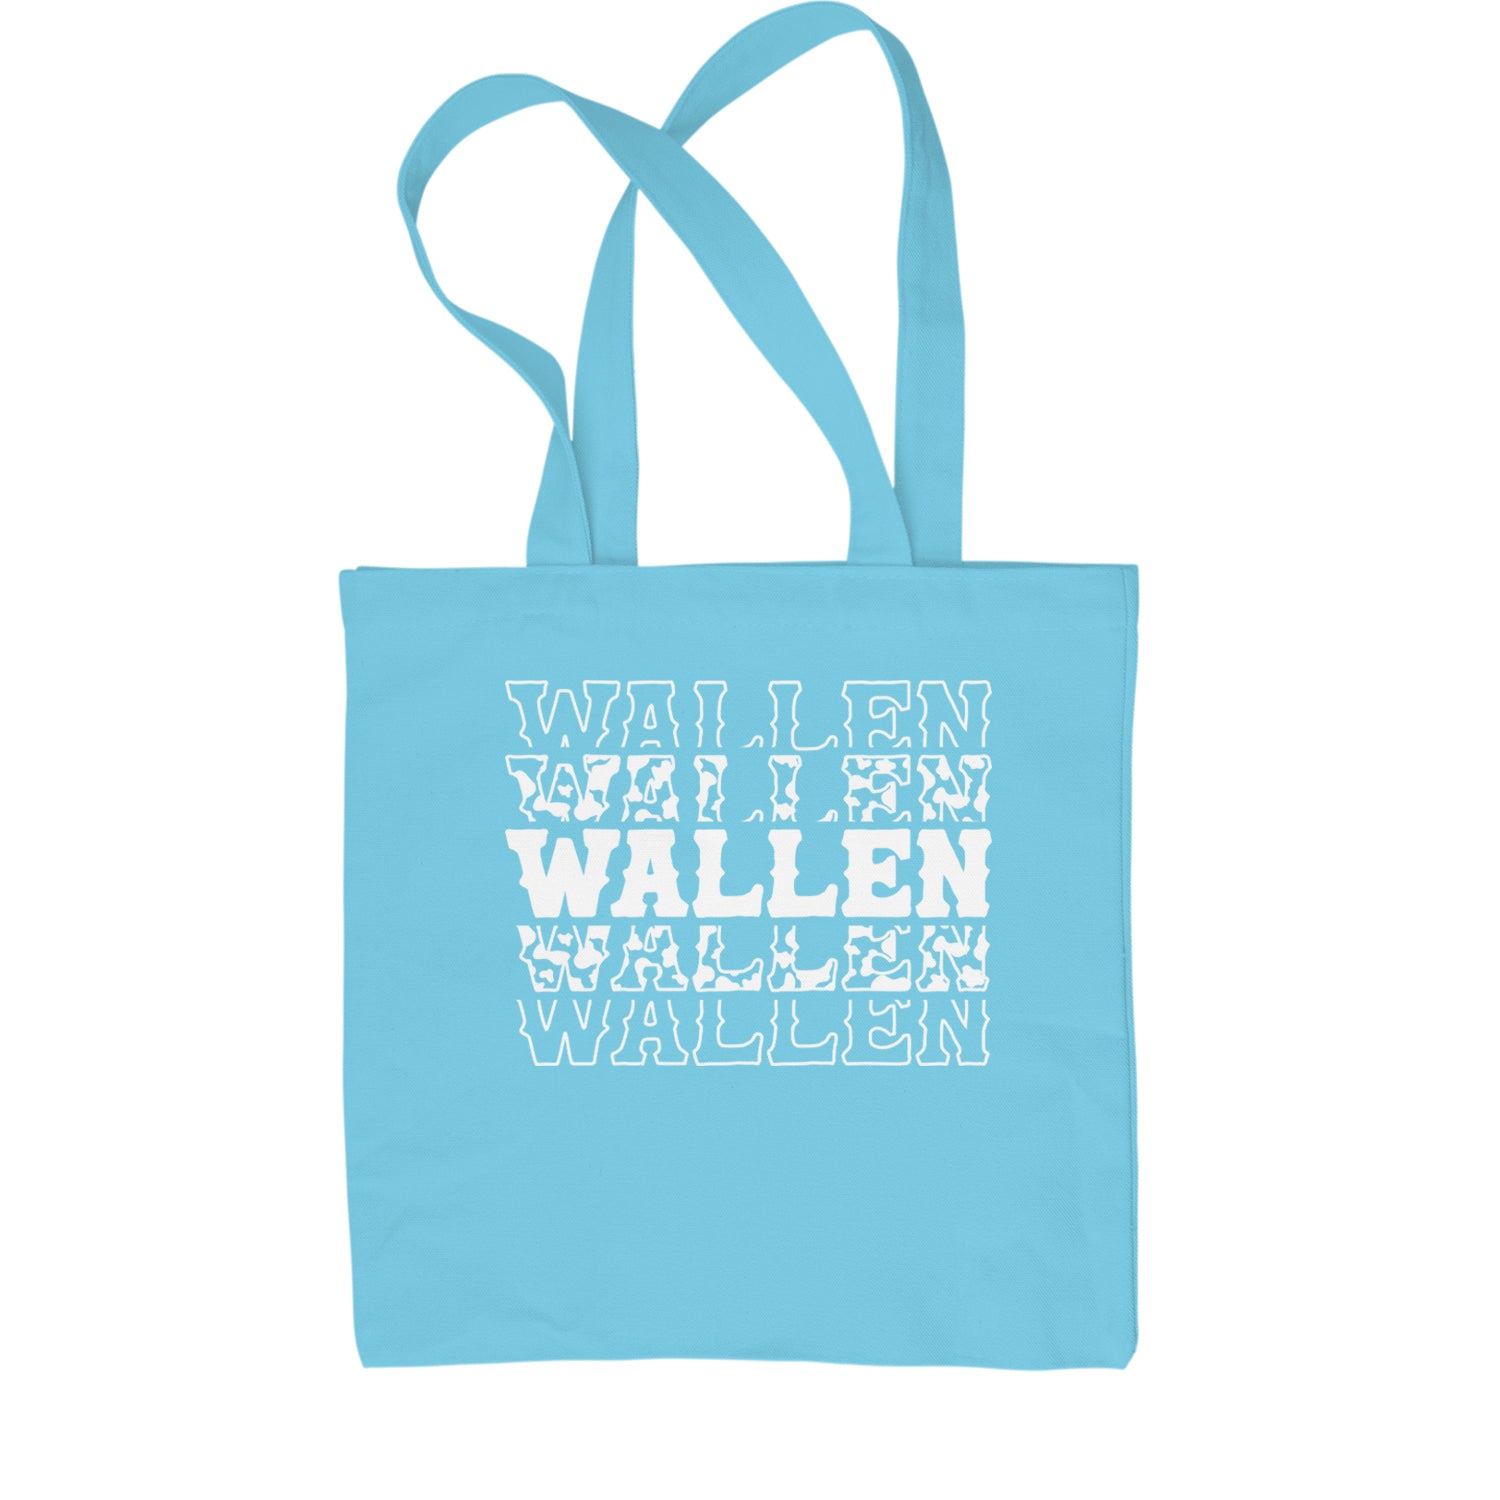 Wallen Country Music Western Shopping Tote Bag